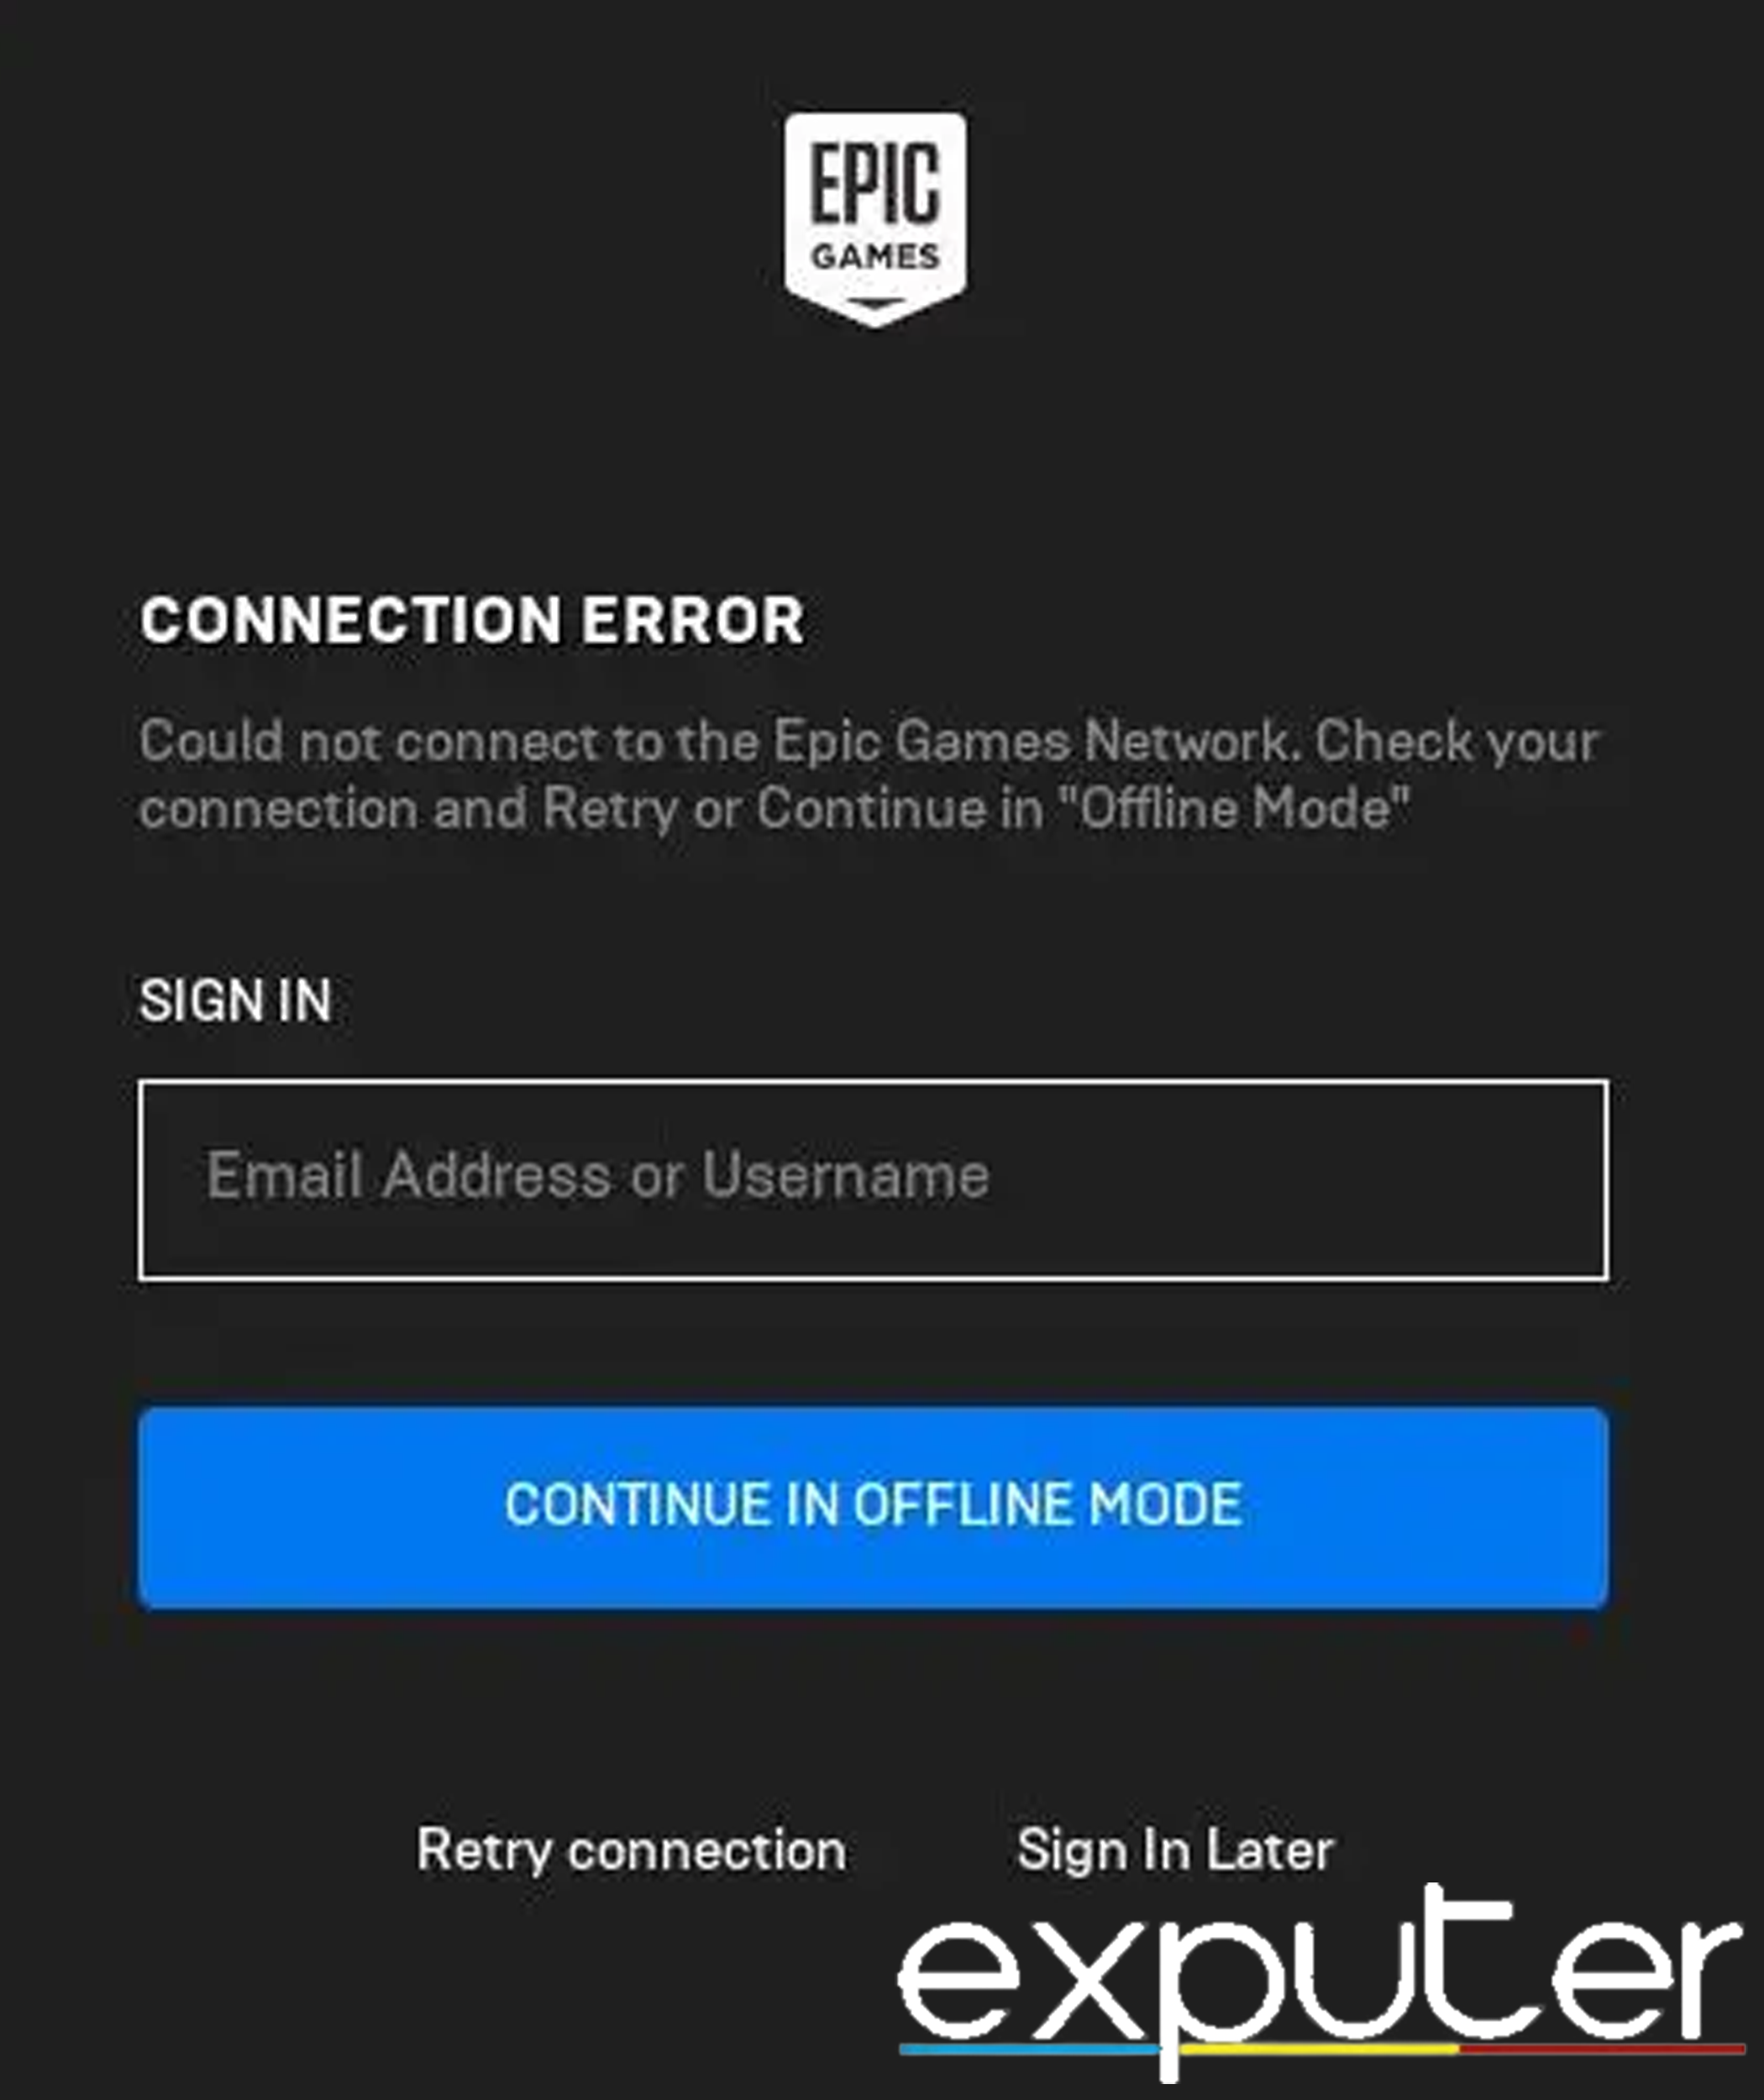 Epic Games Connection Error. (image by eXputer)